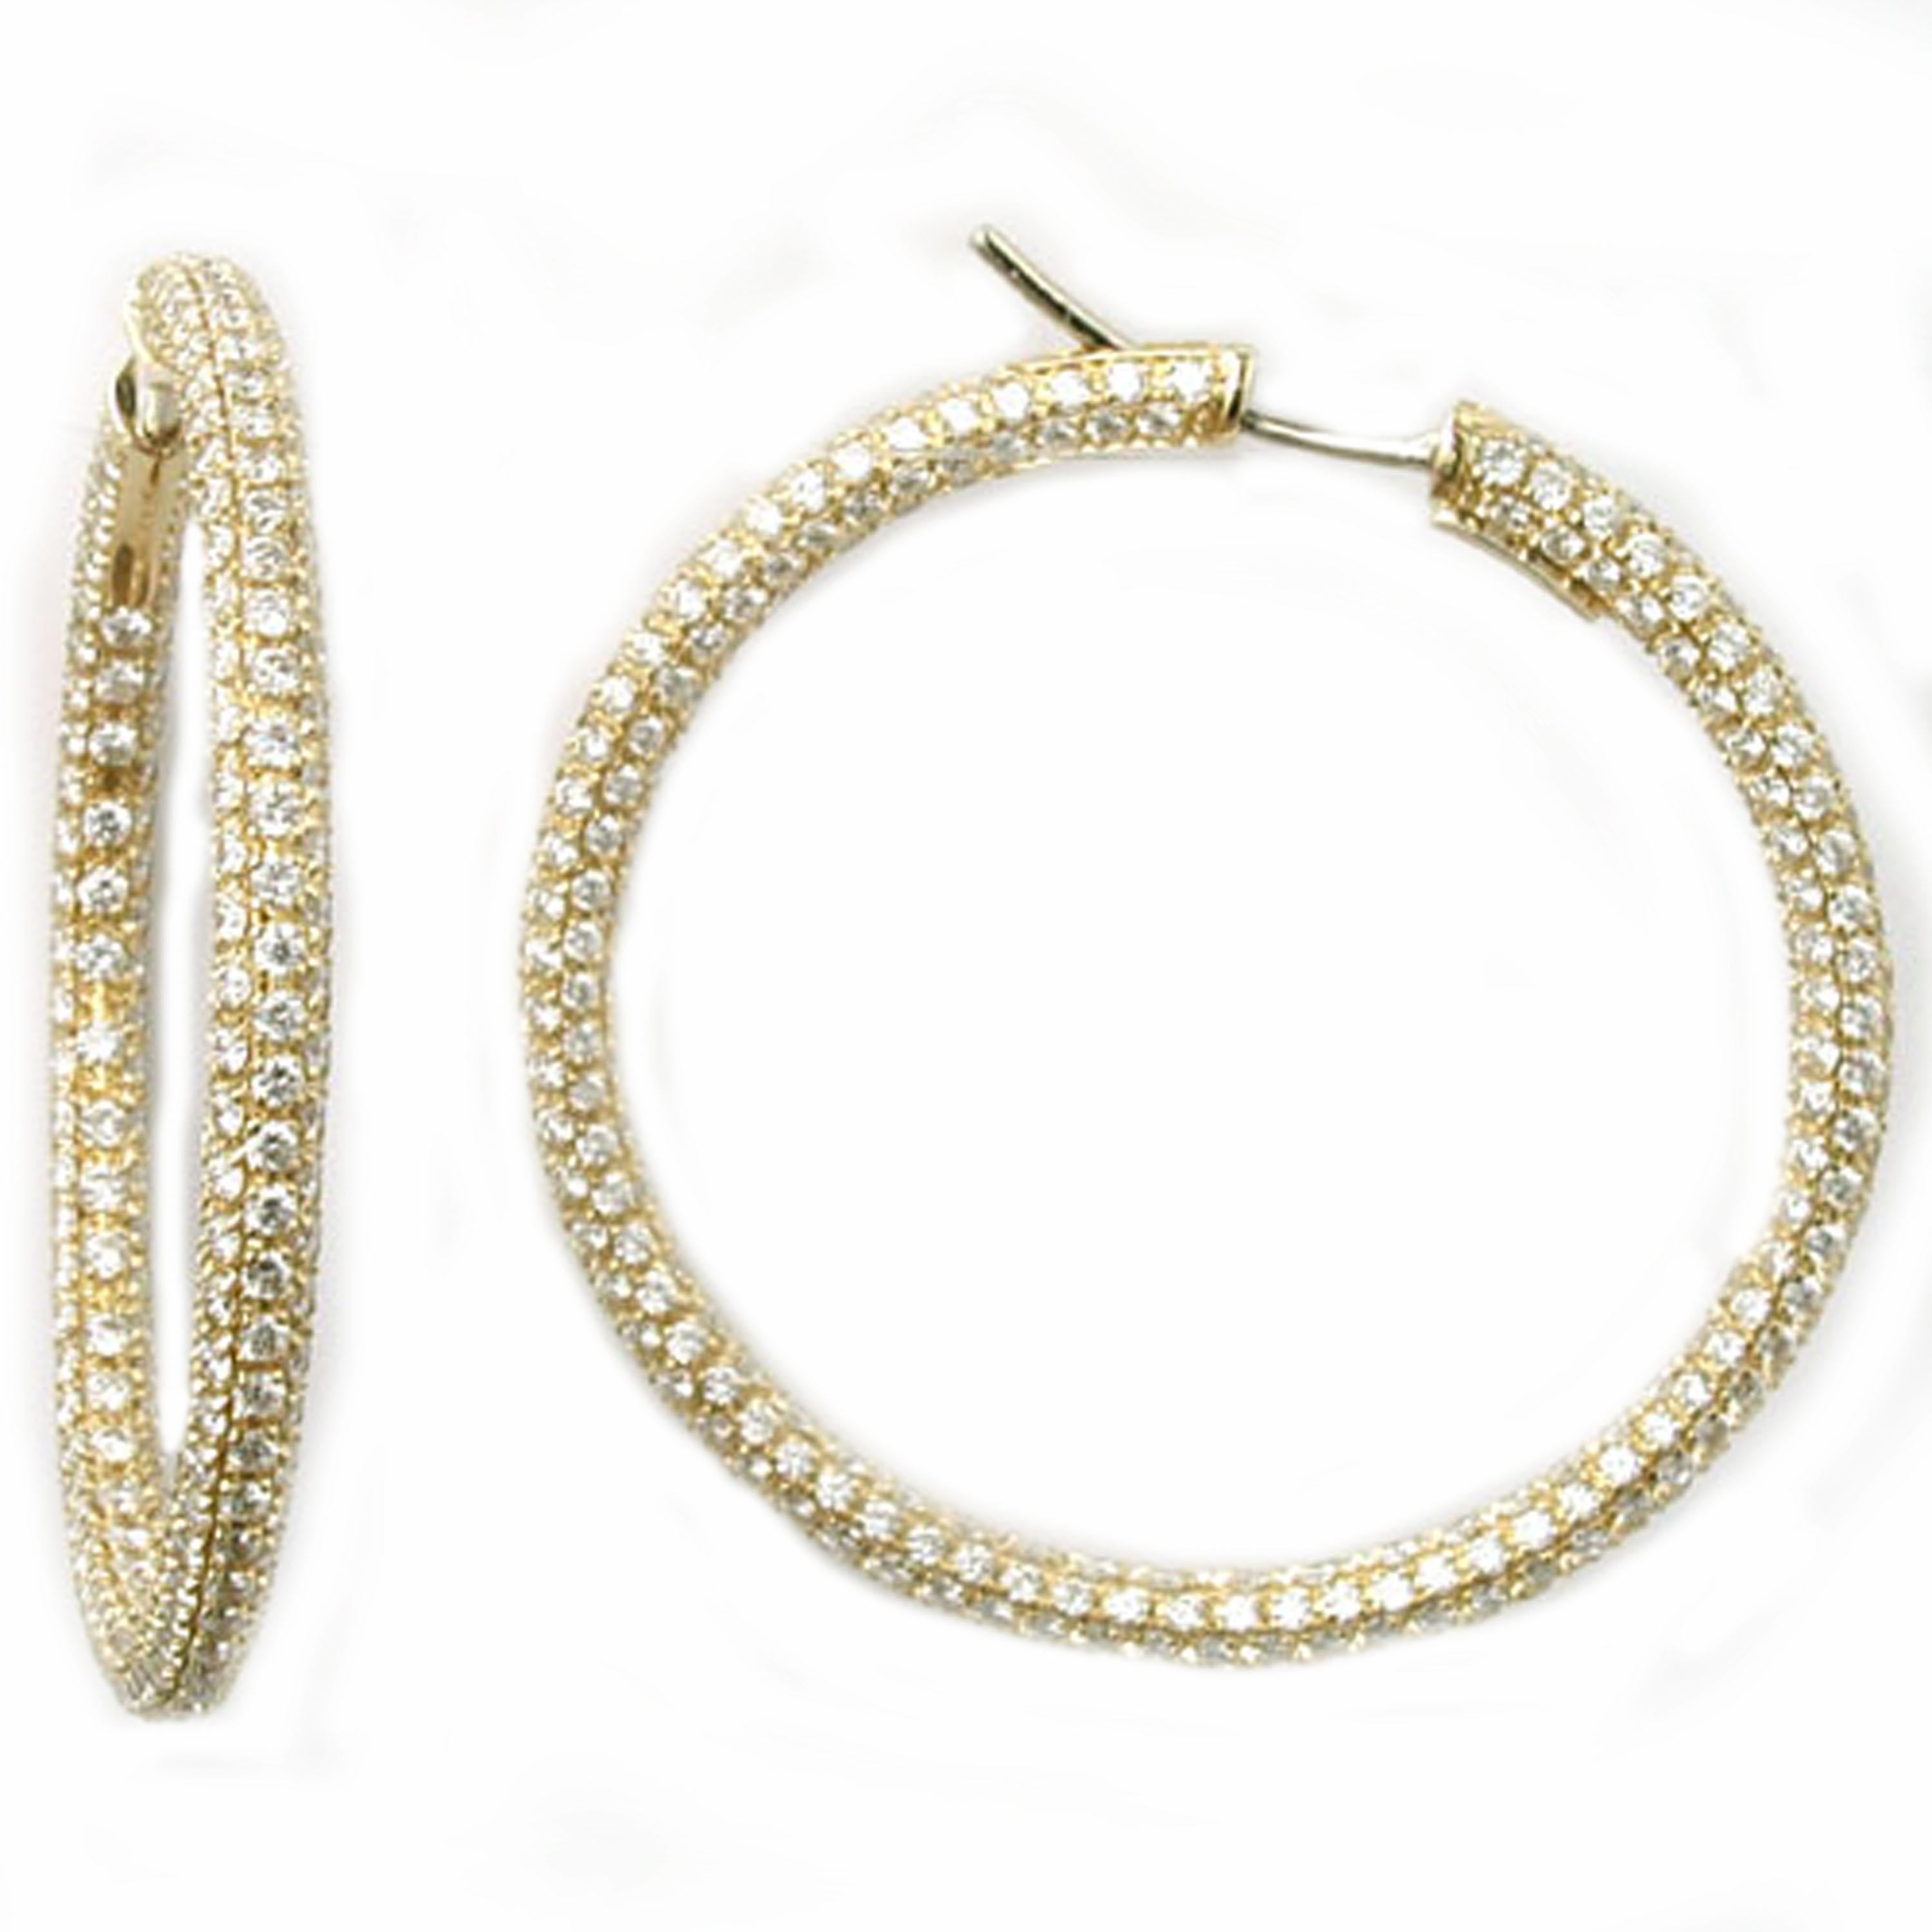 Garavelli 18 Karat Yellow Gold Diamond Eternity Round Hoop Earrings
The traditional and classic pavé diamond hoops. It's exceptional that you don't see gold,  just diamonds. Internal diameter mm 38
18KT GOLD  gr: 21.50
WHITE DIAMONDS ct : 9.77
Made